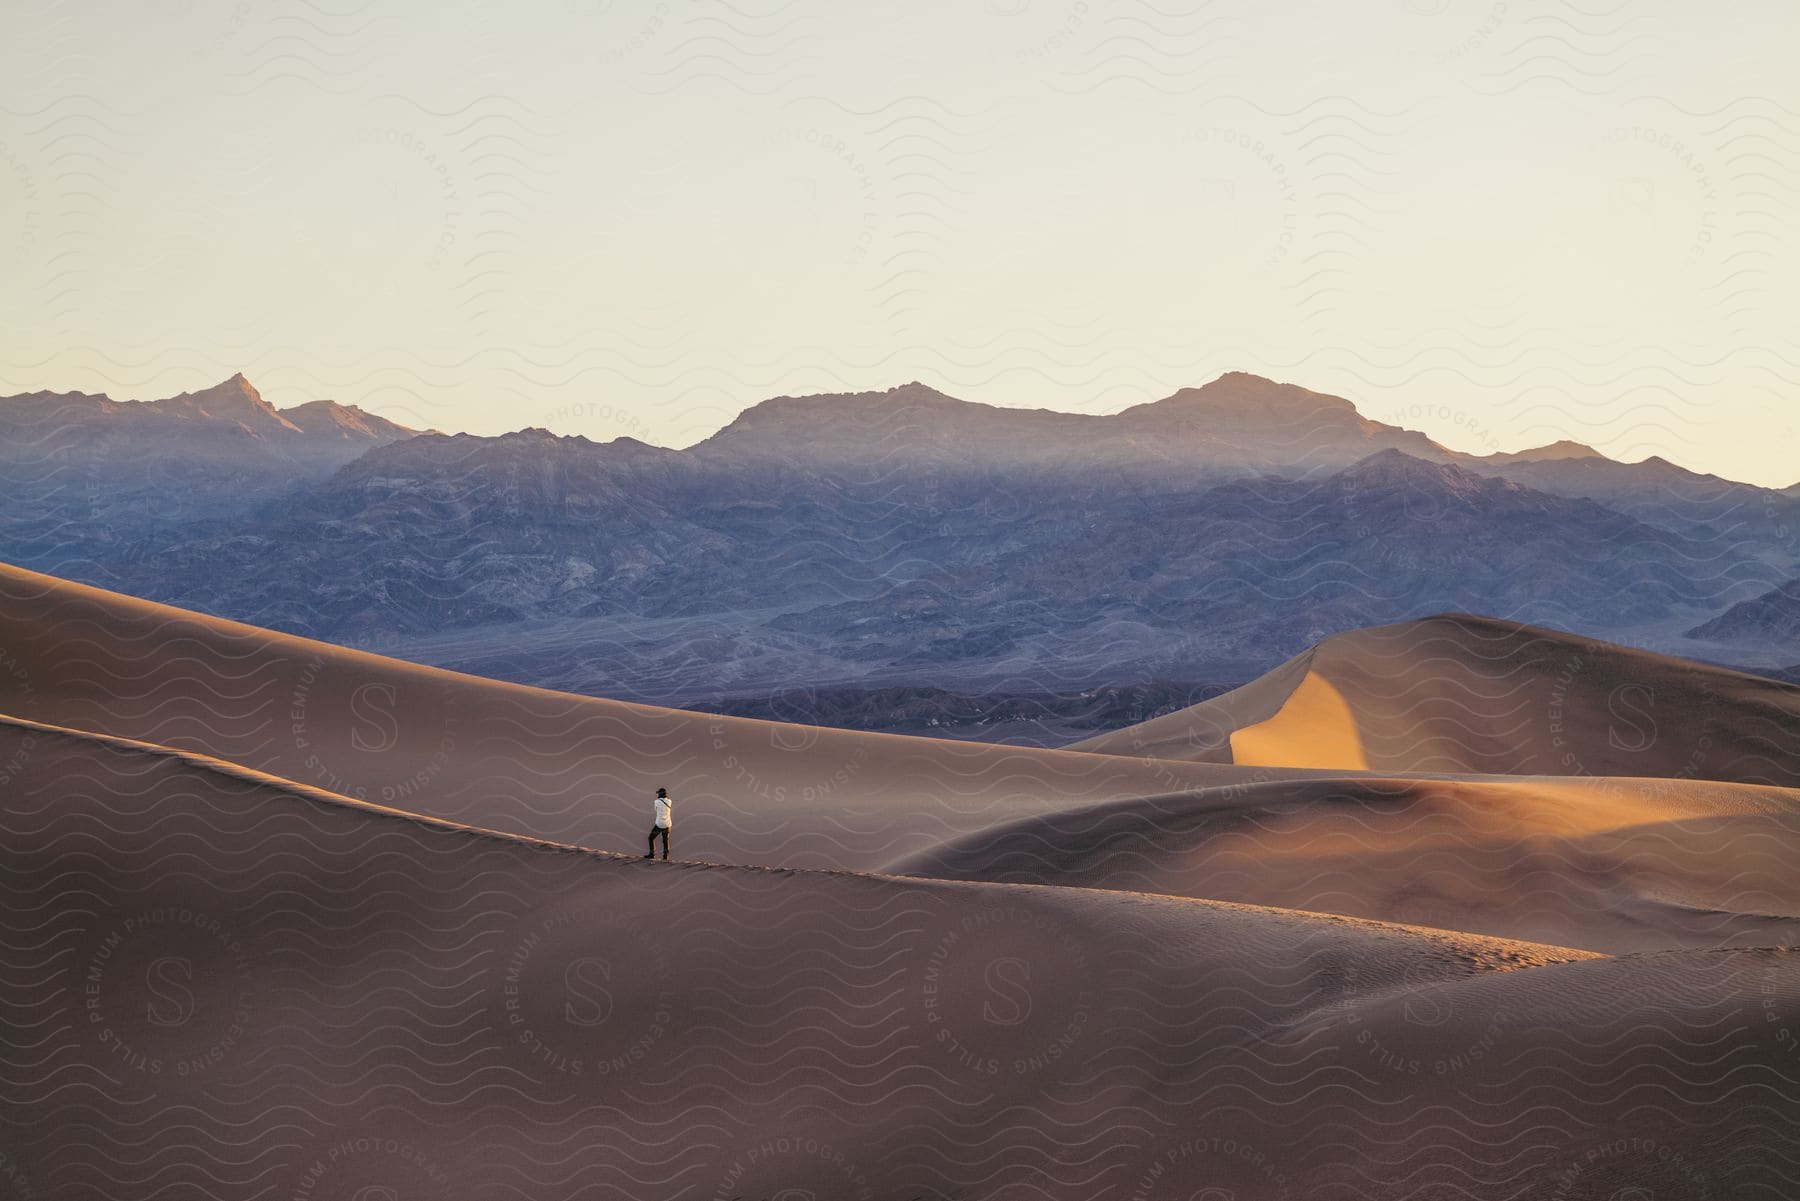 A man stands on a sand dune in the outdoors during the day